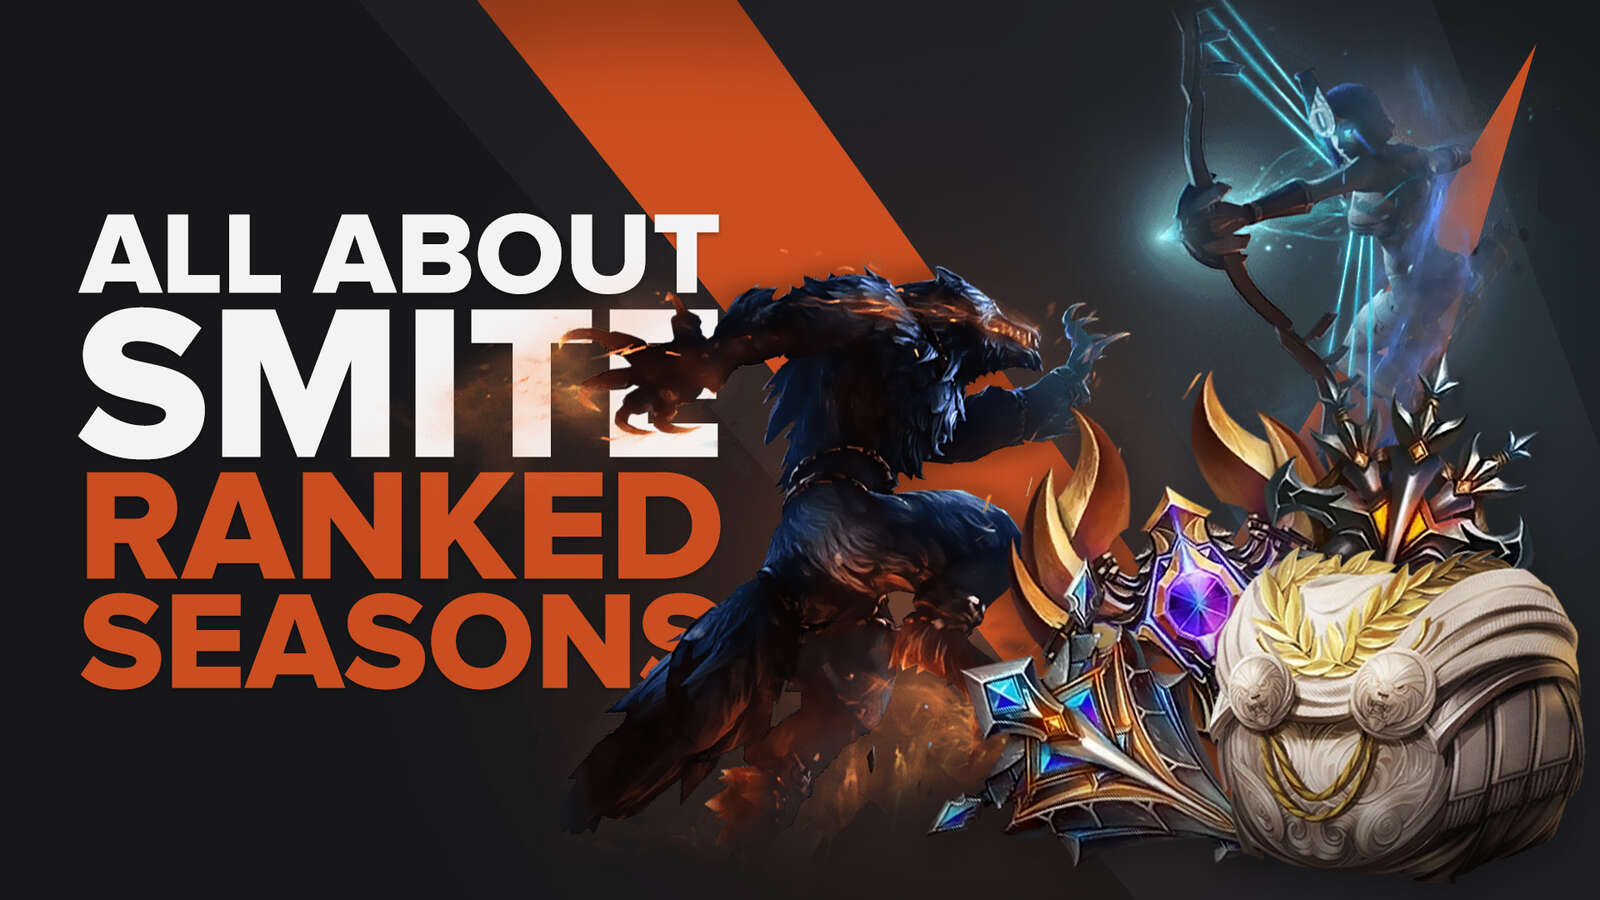 Ranked Seasons in Smite: Everything You Need to Know (Duration, Rewards, etc...)